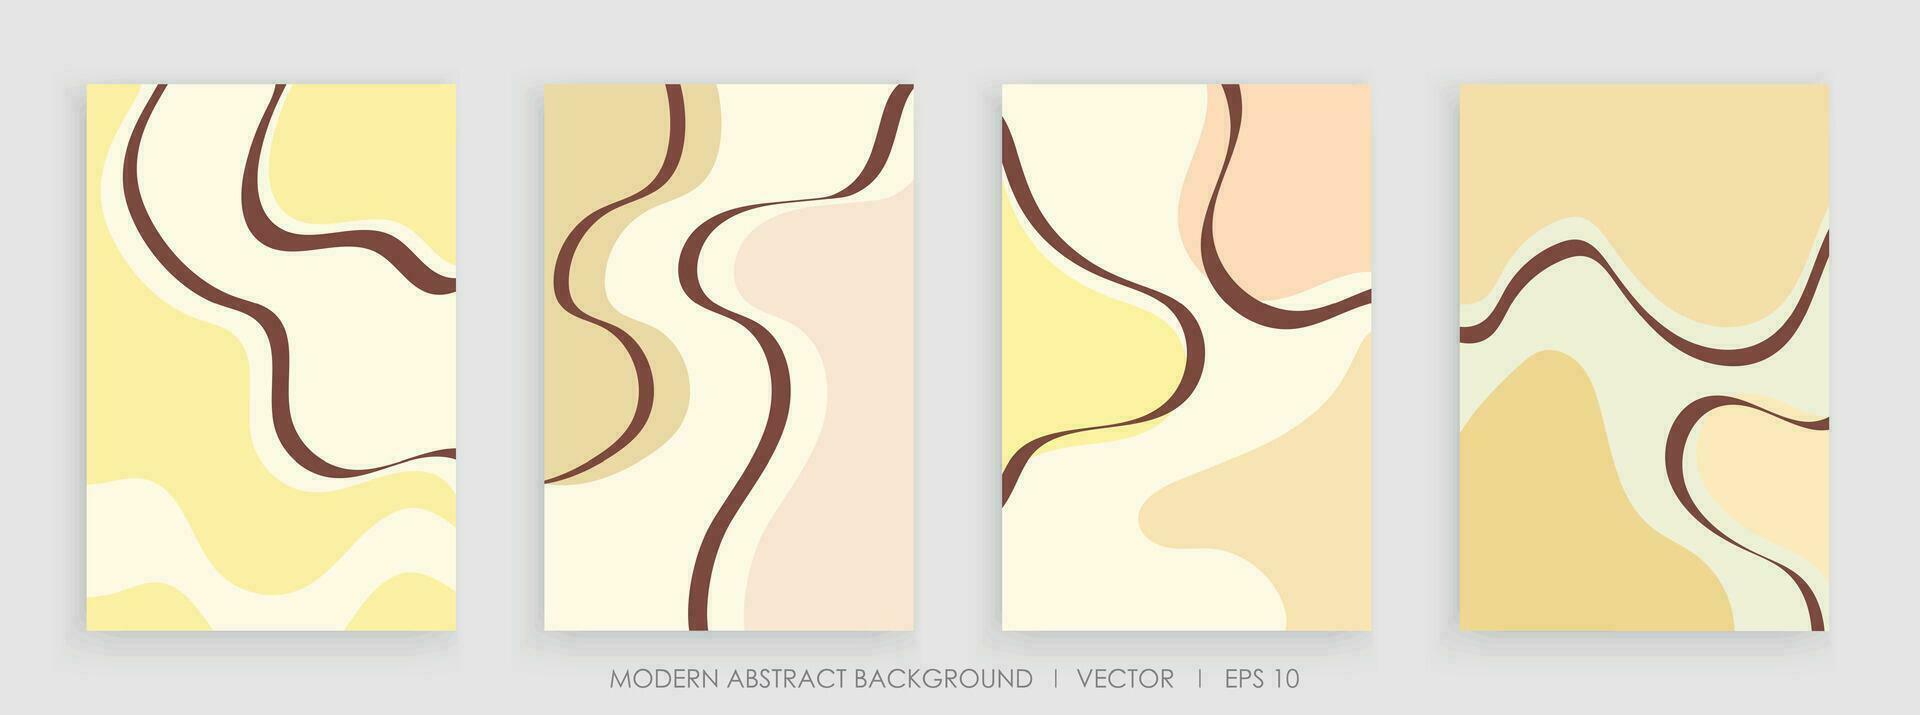 Modern abstract creative backgrounds with wavy shapes and line colorful colors design vector